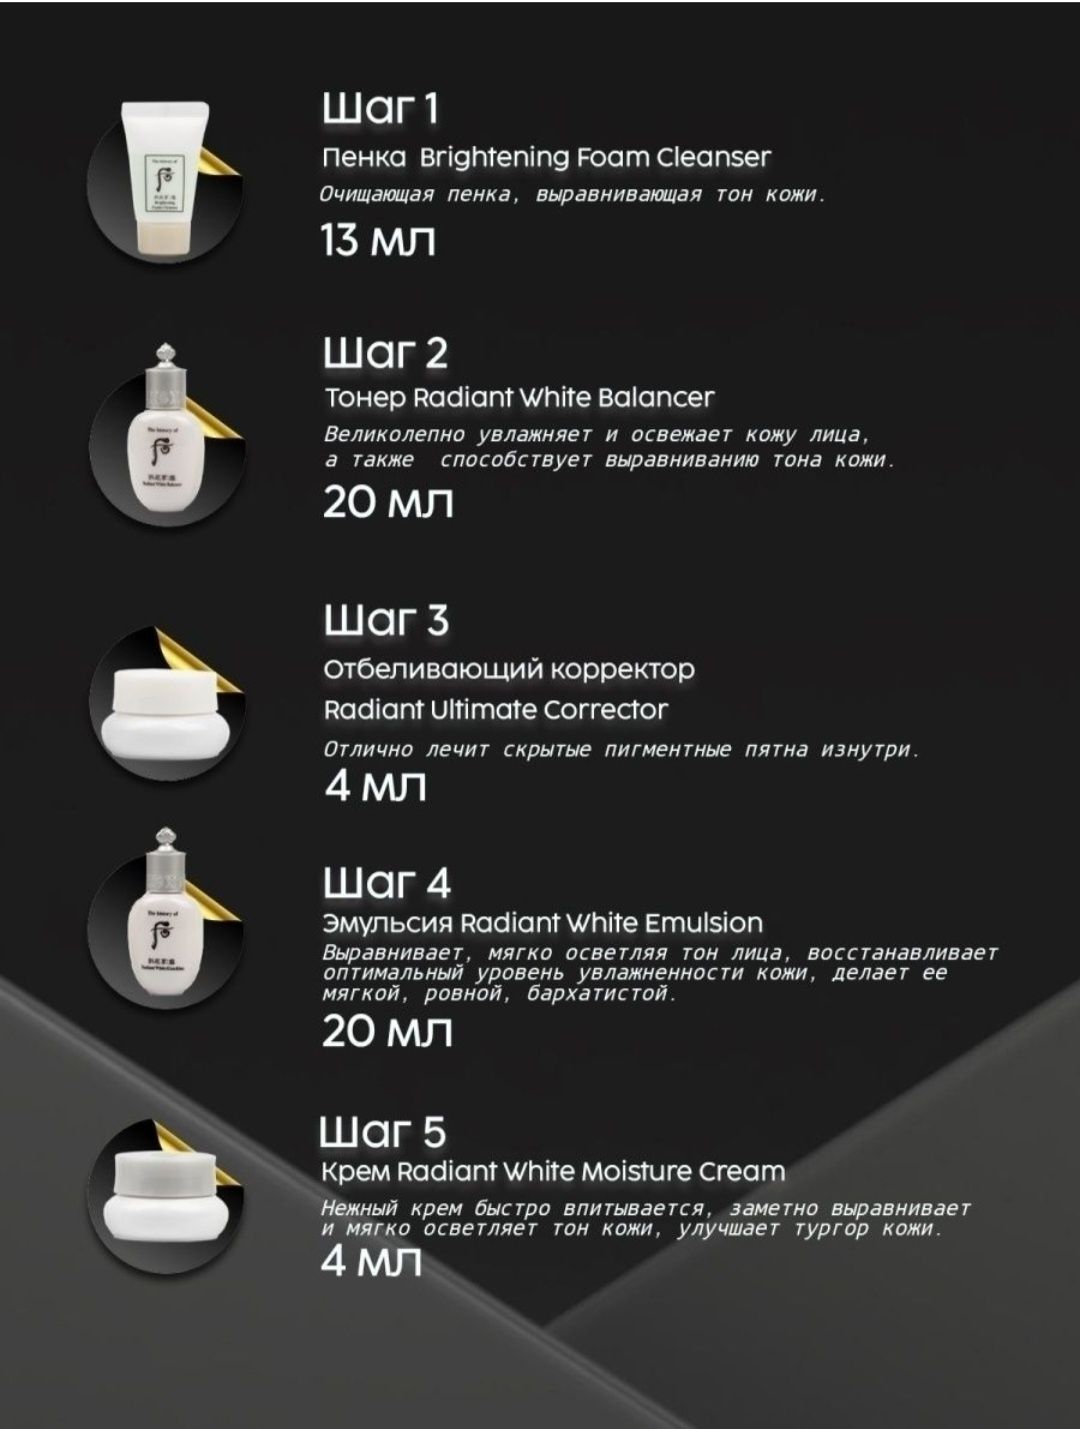 The history of whoo